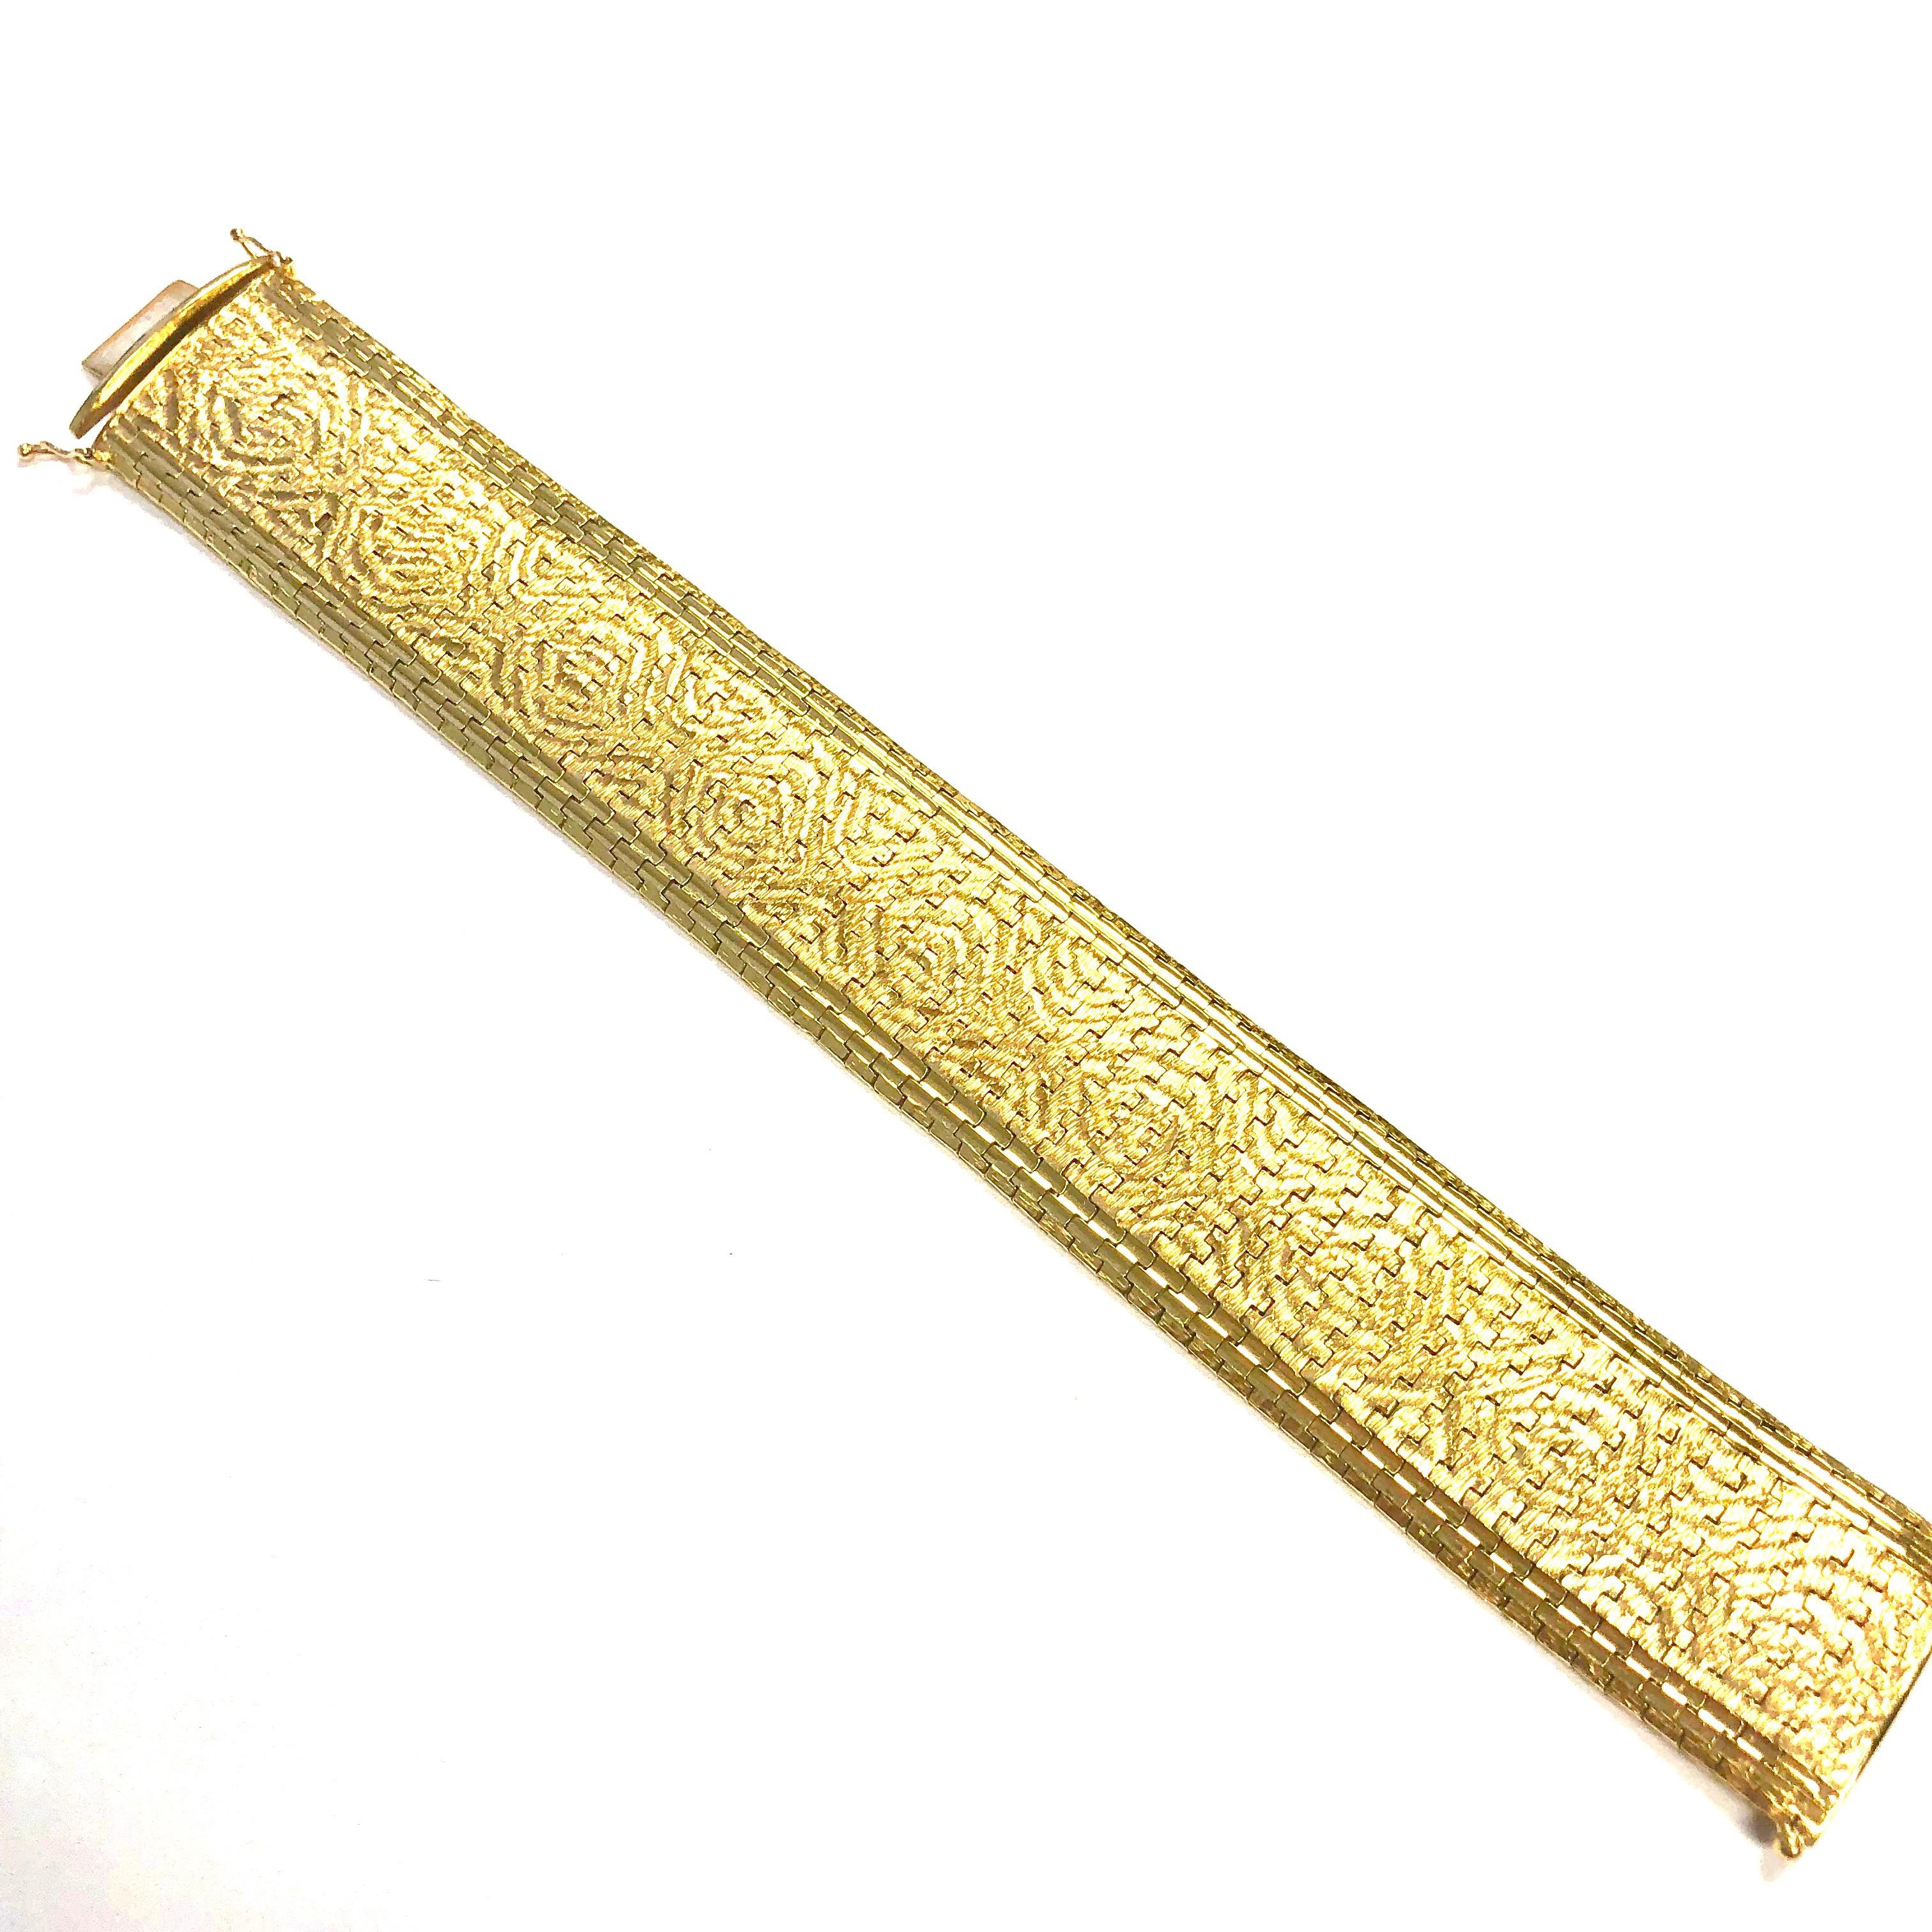 Vintage 18K brushed gold bracelet with a design looks like a lovely brocade and flexible mesh undeneath. Well made Italian piece. Hidden box clasp with double safety eights for extra security.
Measurements:
Length: 7.5 inches
Width: 1.07